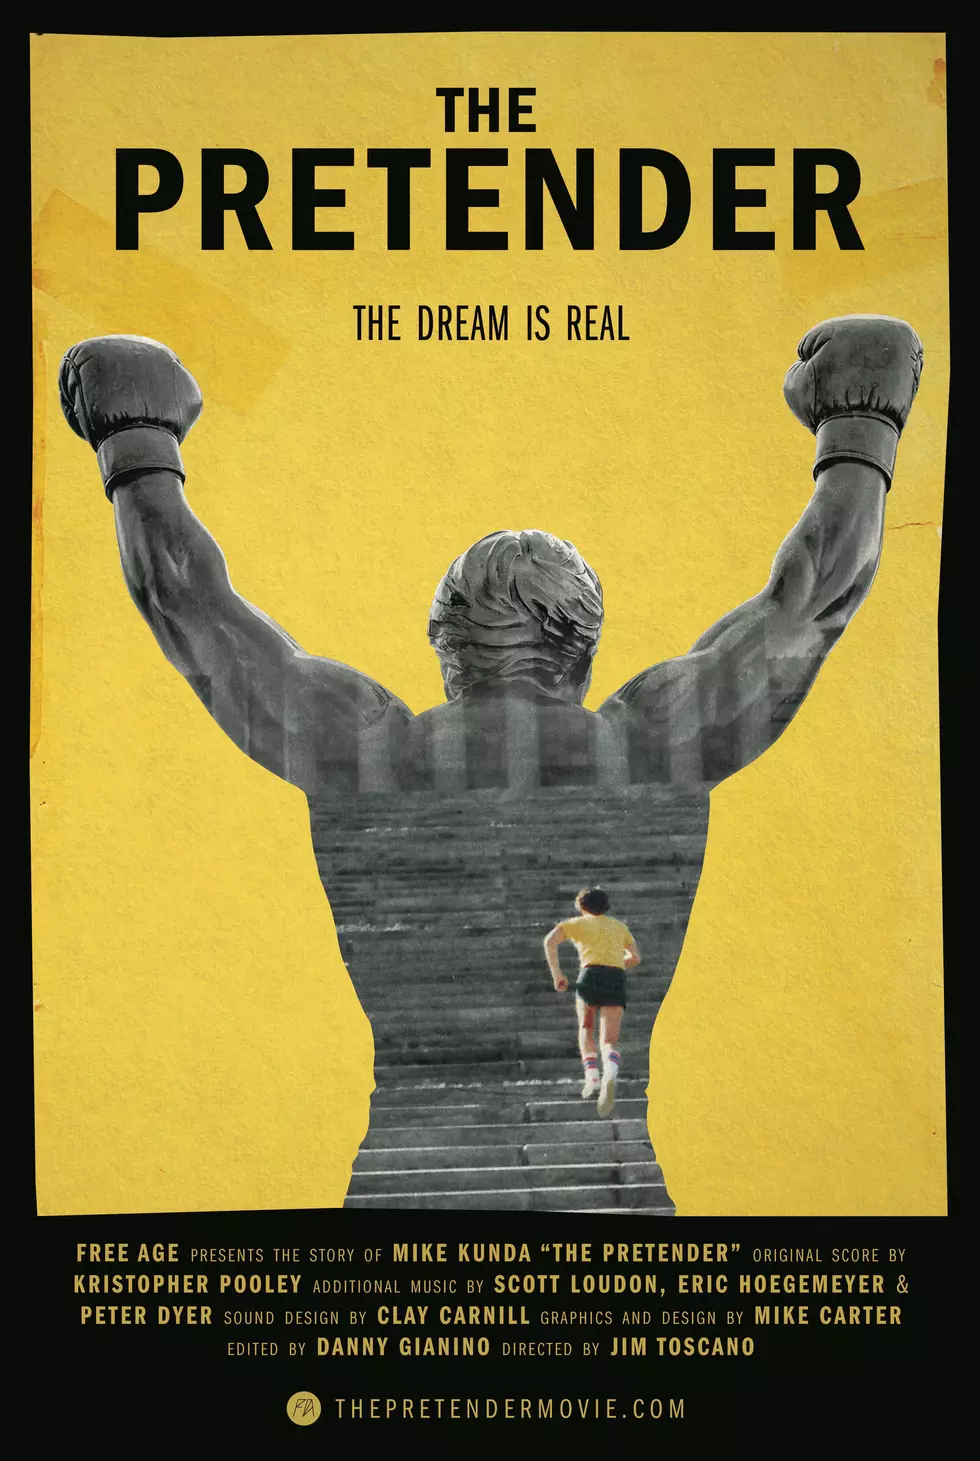 The Pretender Is Documentary About The World’s Biggest Rocky Fan